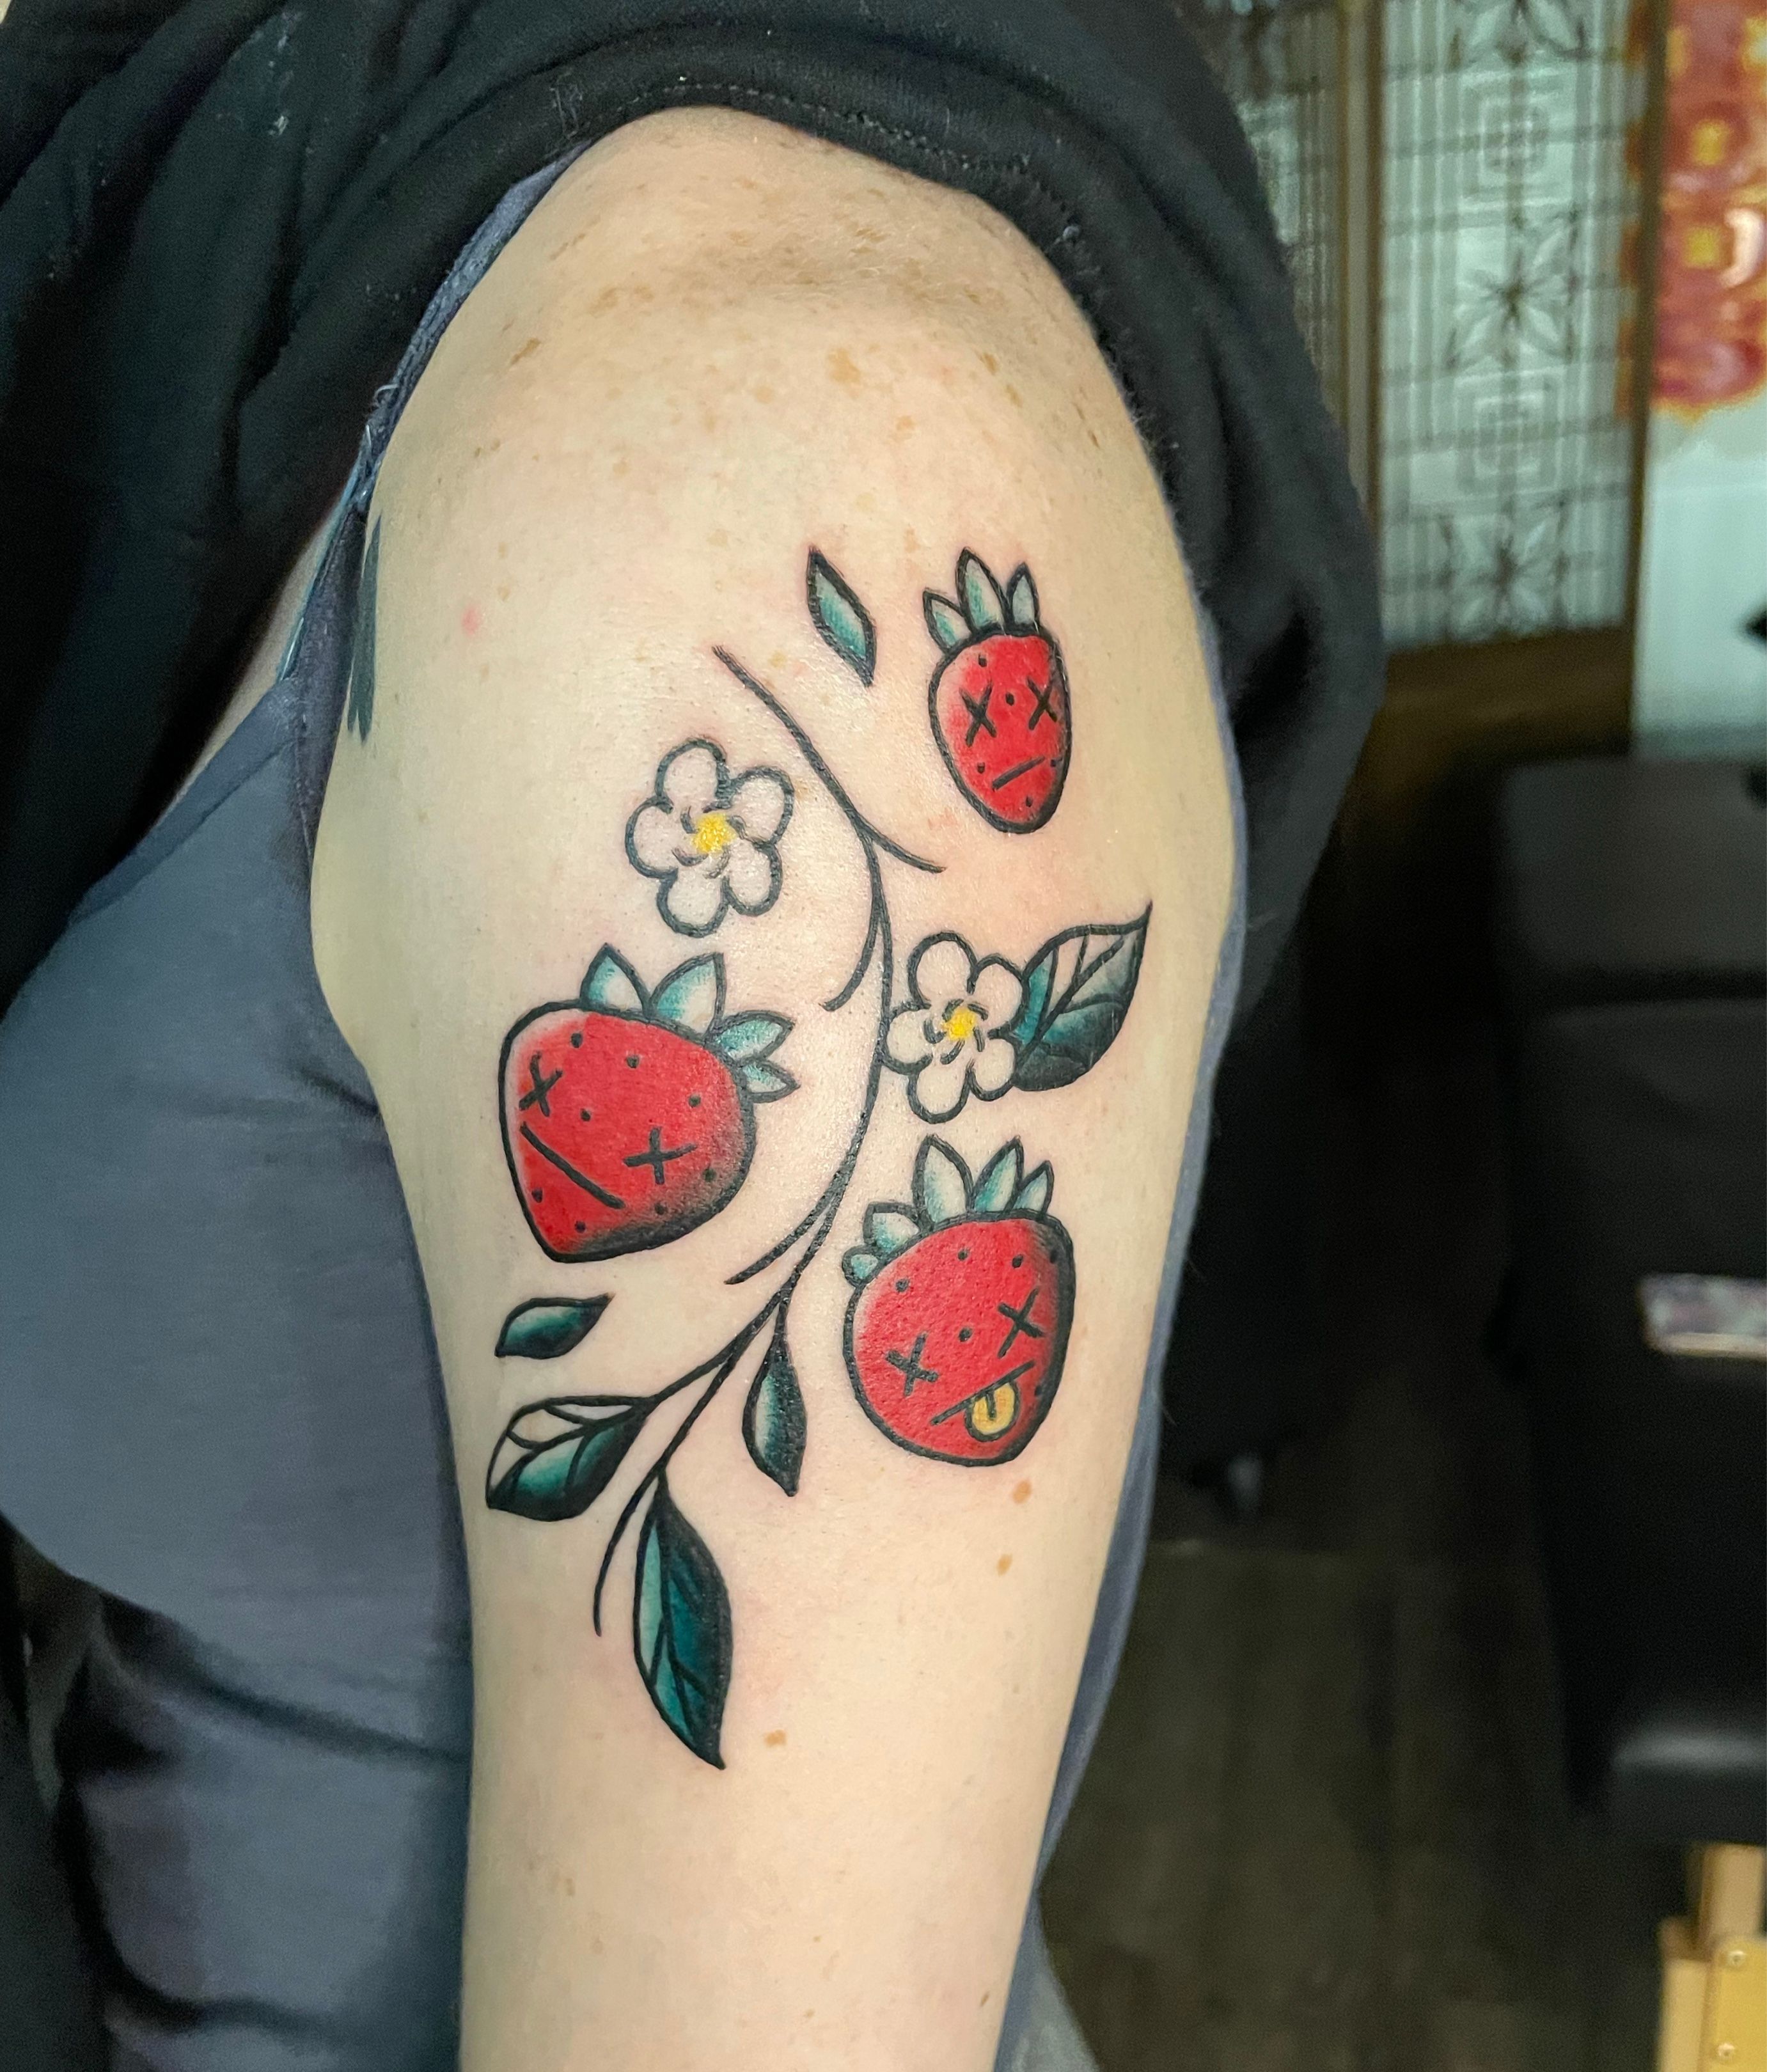 Strawberry Sliced SemiPermanent Tattoo Lasts 12 weeks Painless and easy  to apply Organic ink Browse more or create your own  Inkbox   SemiPermanent Tattoos